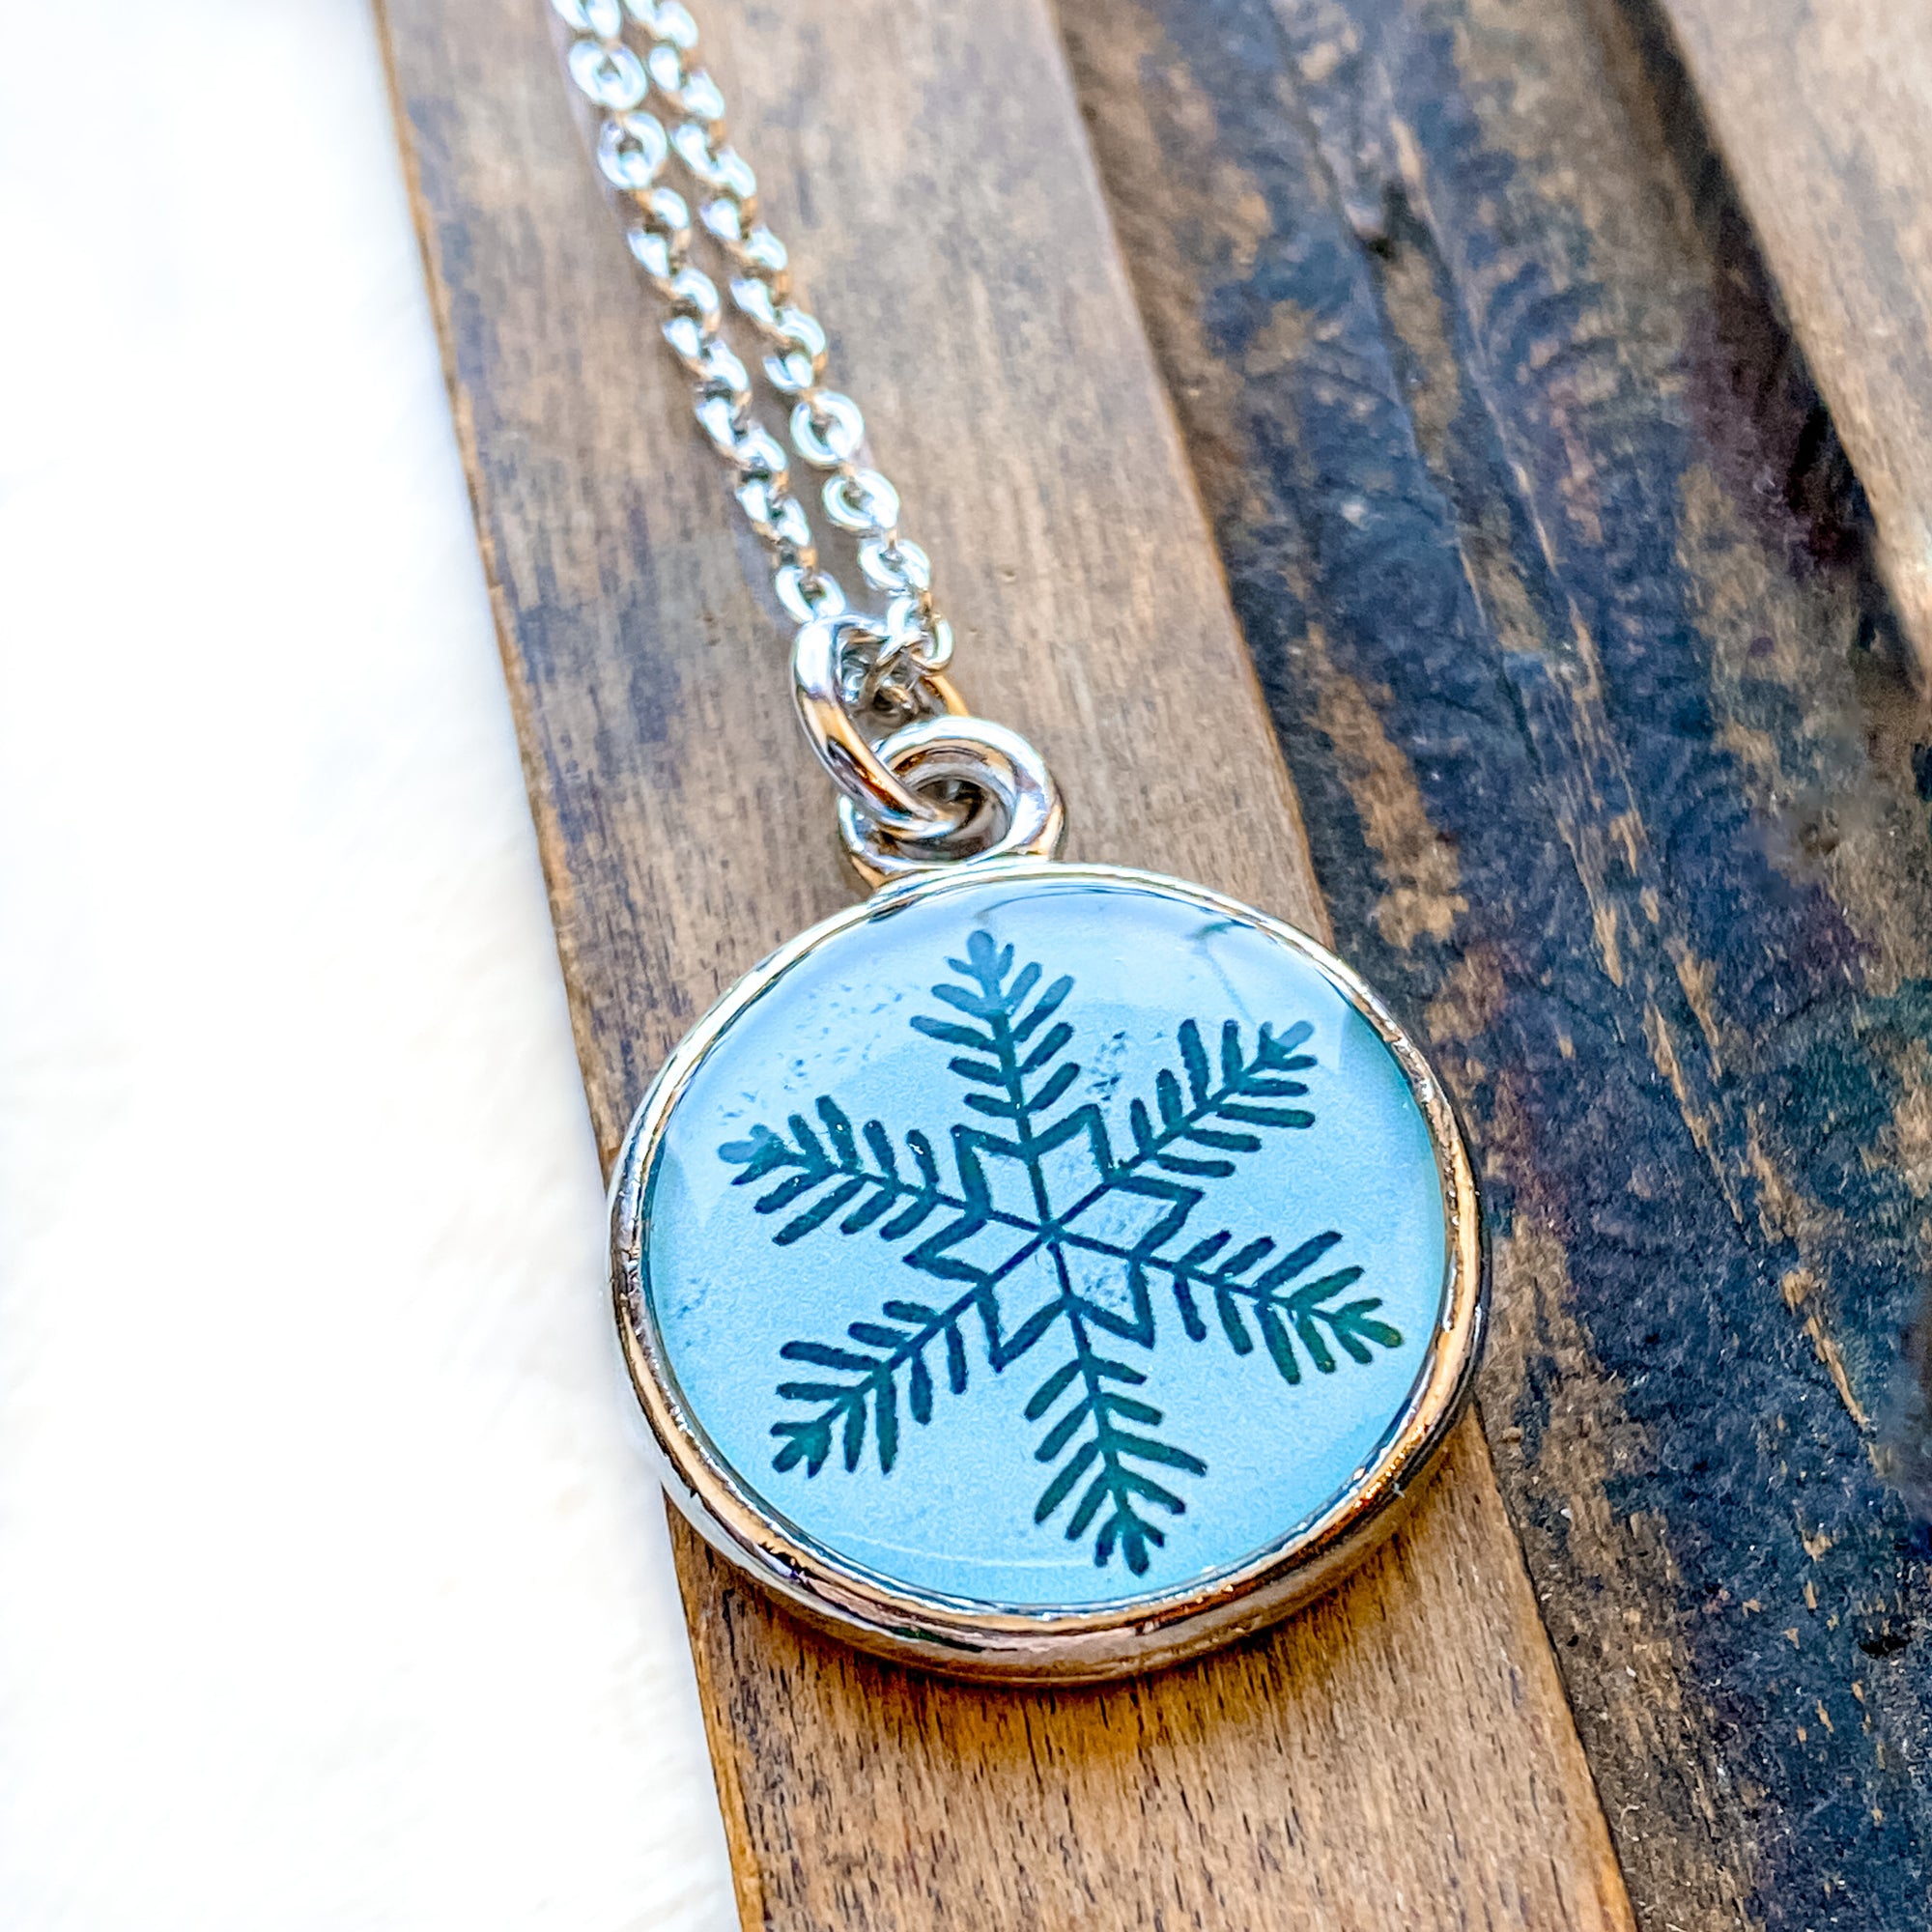 a necklace with a snowflake design on it